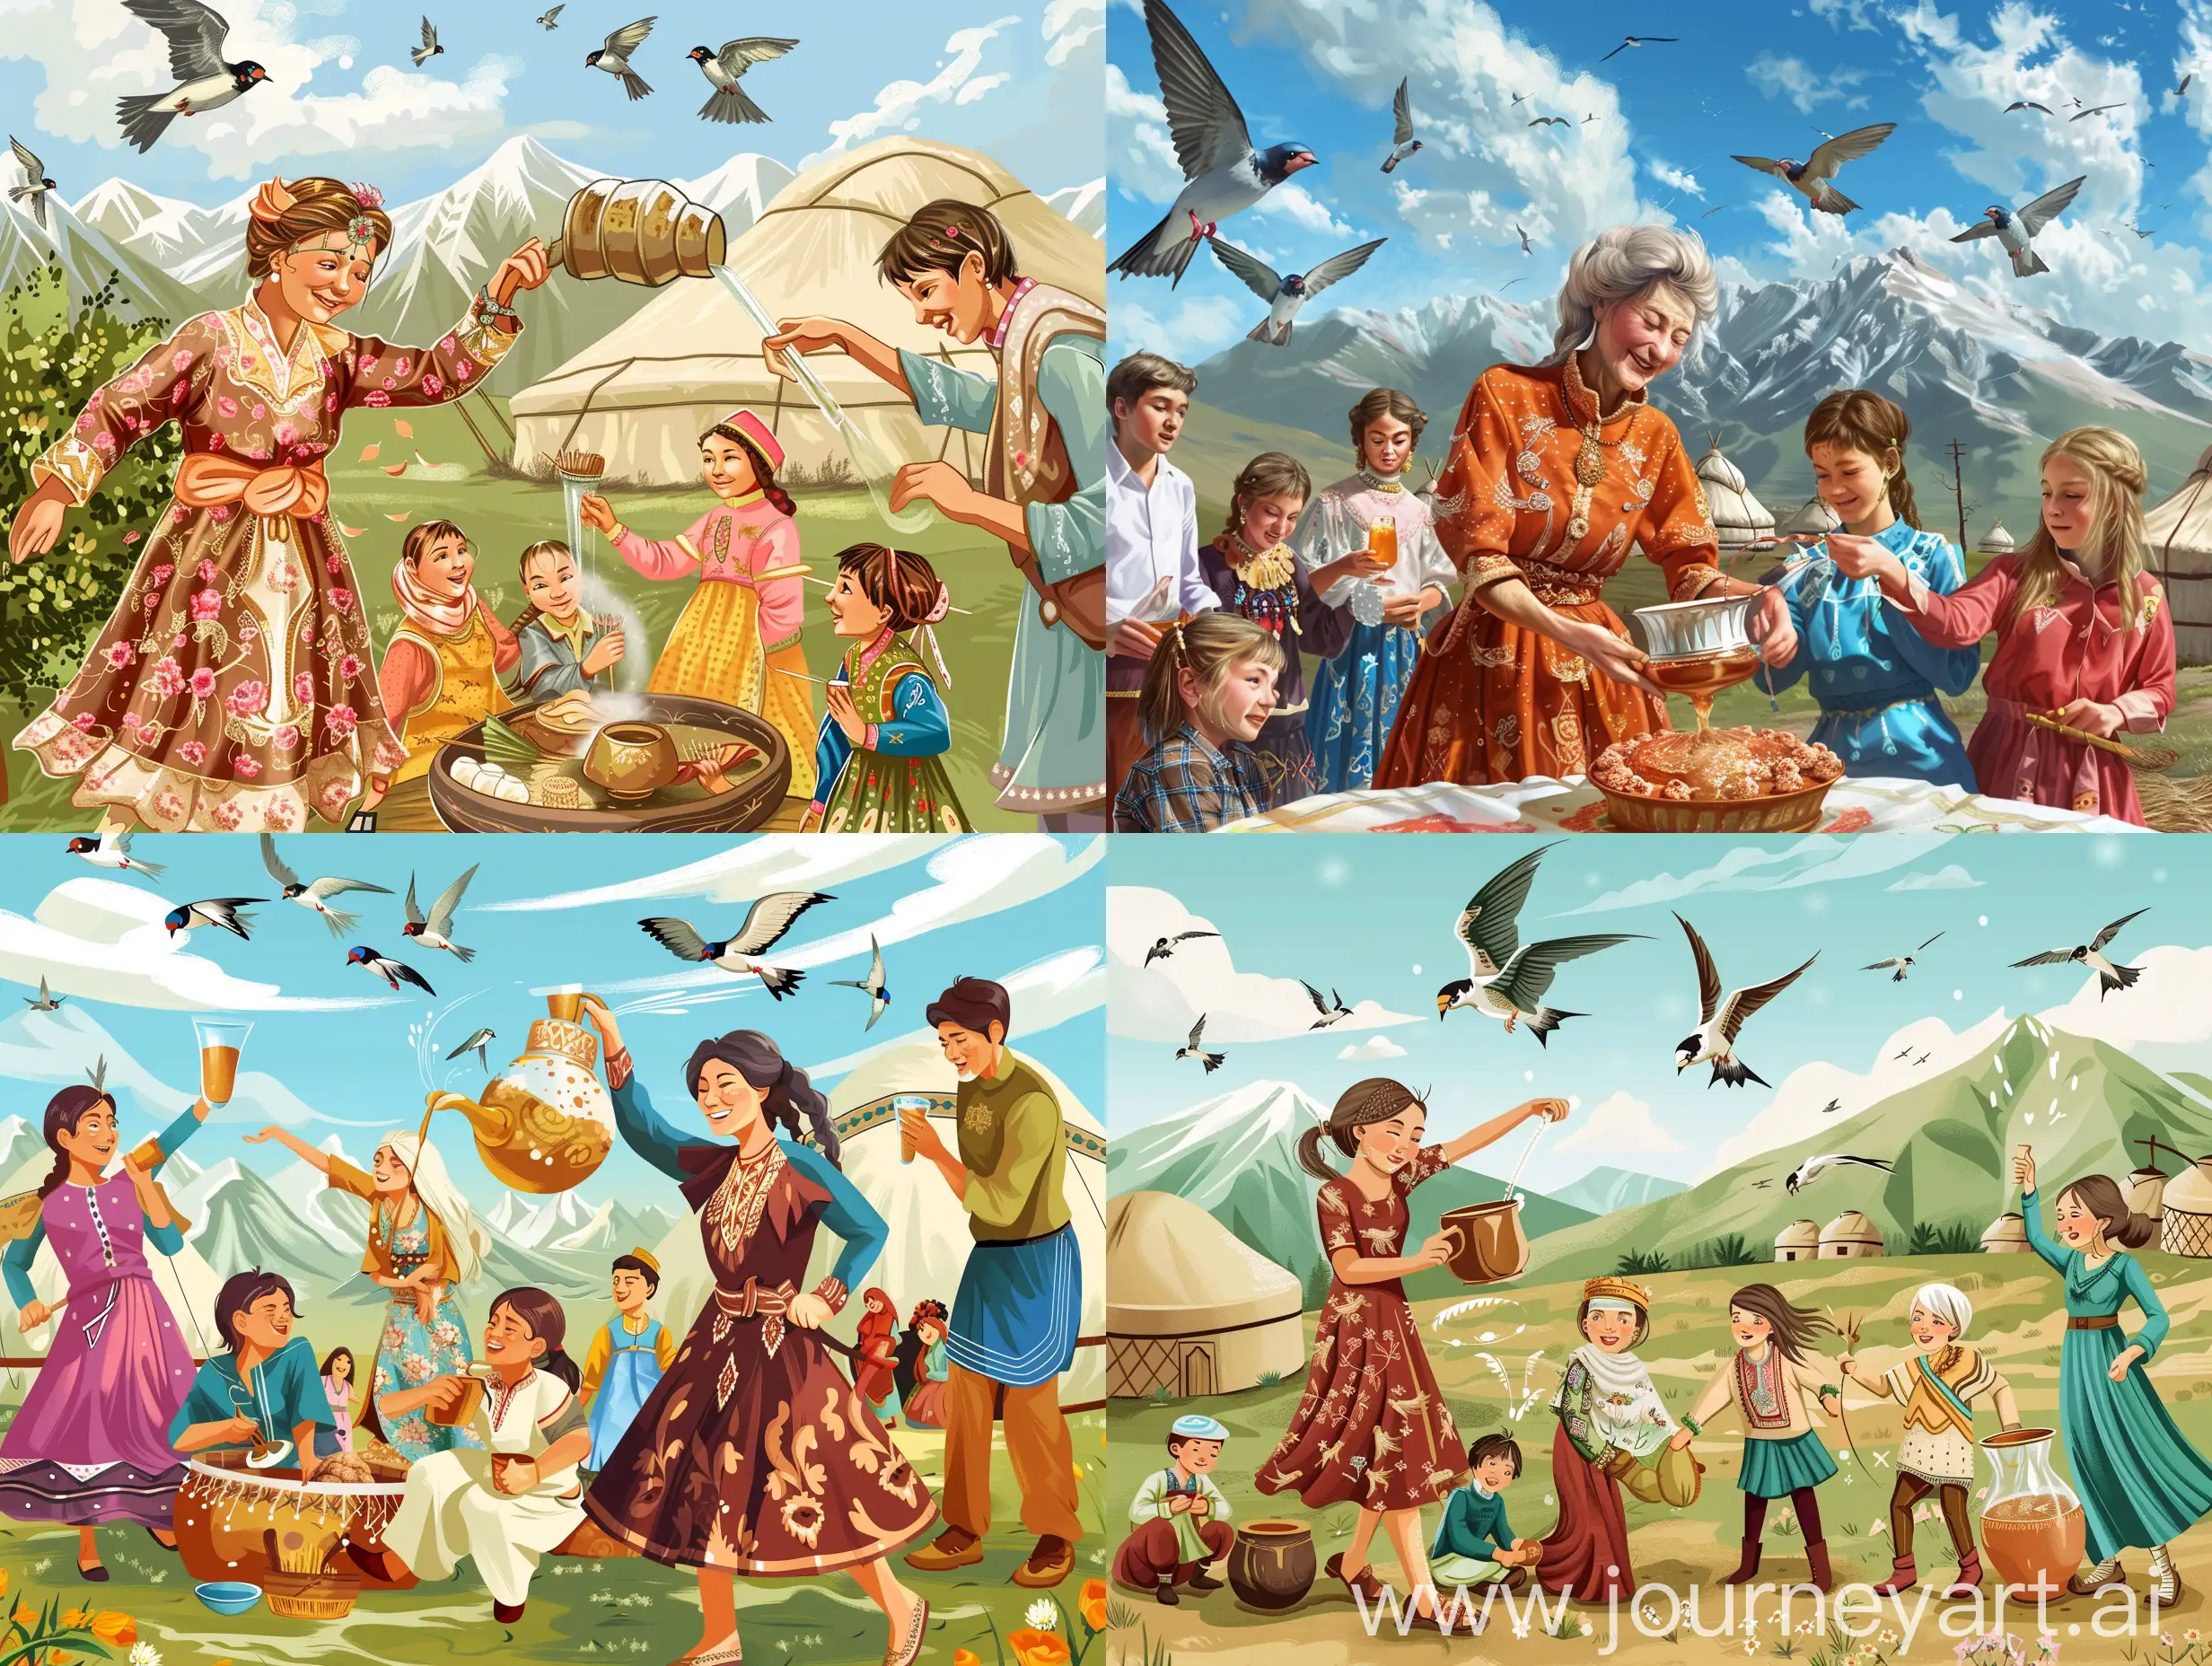 Generate an image for a banner on the theme of Nauryz in Kazakhstan, where there is an atmosphere of celebration, spring, and joy, with girls and young men on Altıbakan, a grandmother pouring kumys in a kimeshek, swallows flying, a background of yurt and mountains, zhailau.